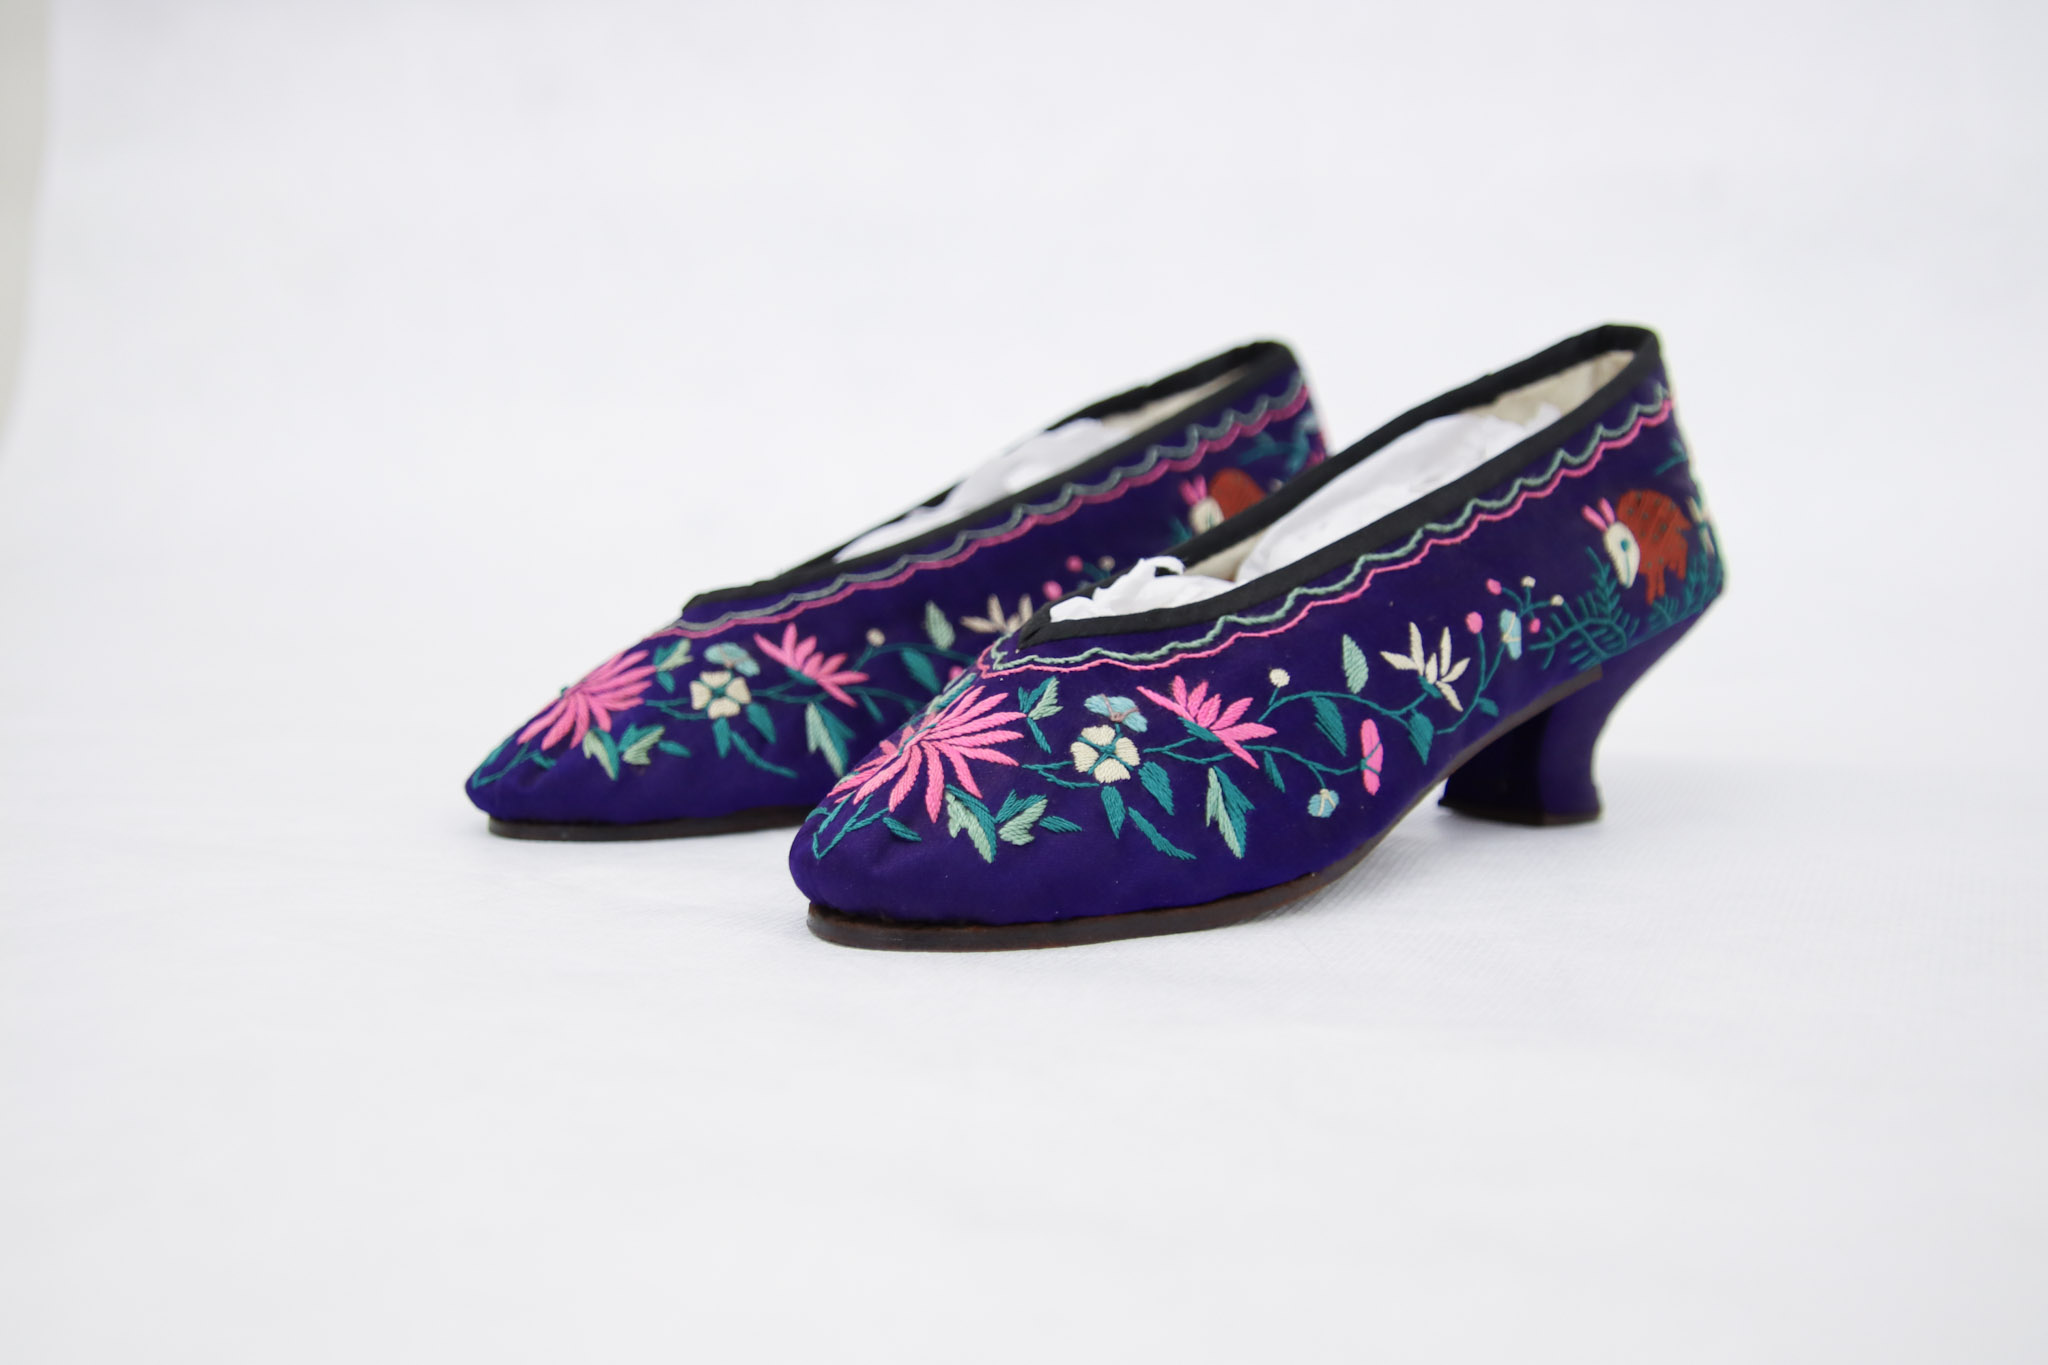 A pair of purple embroidered shoes that belonged to Ann Chung Gon.